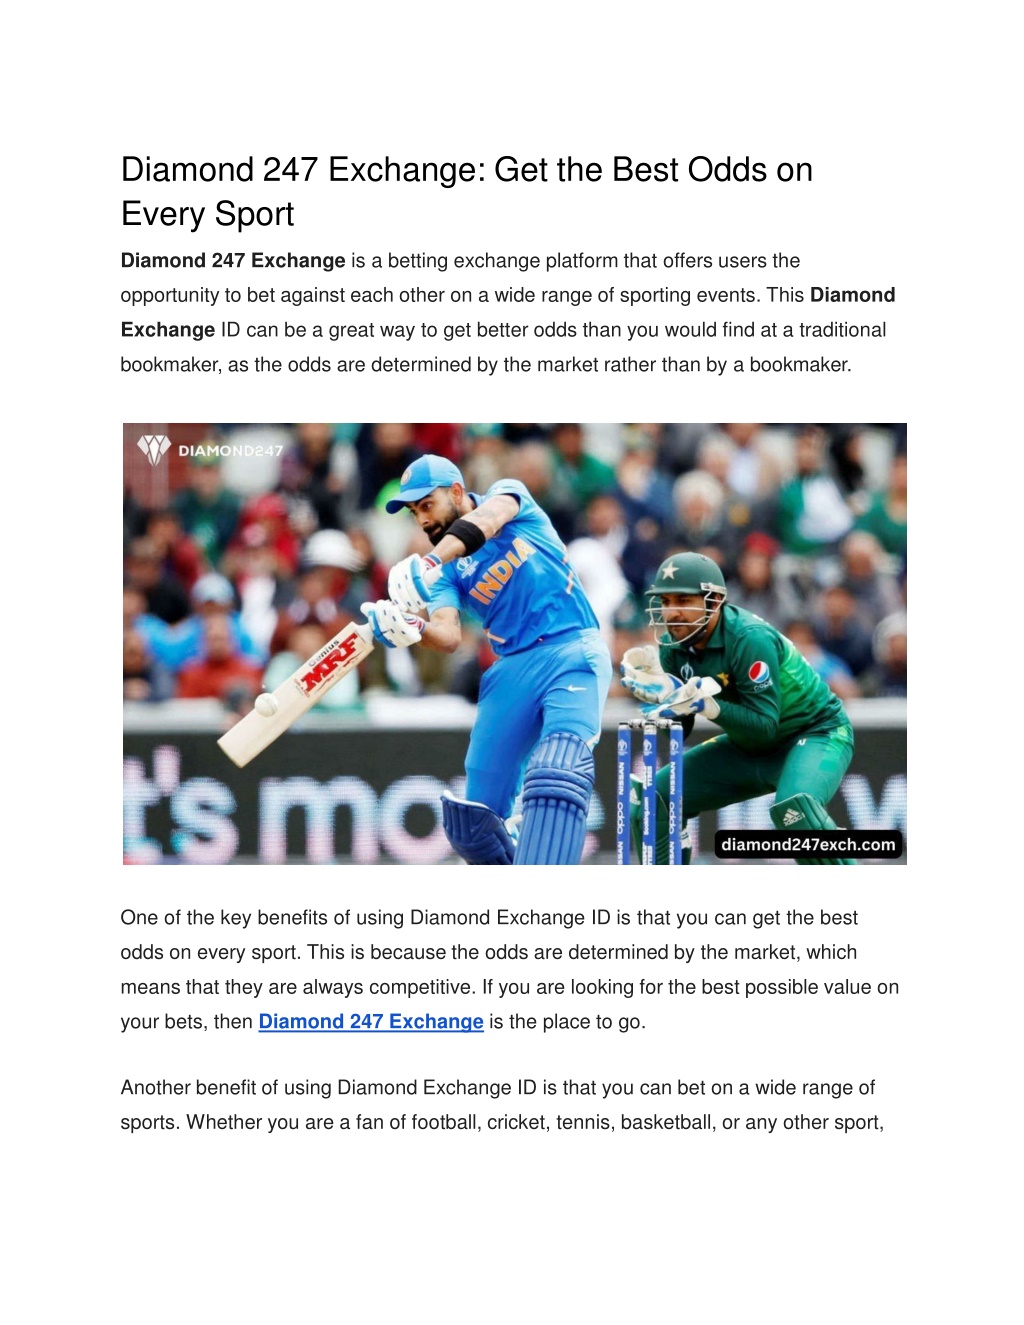 PPT - Diamond 247 Exchange Get the Best Odds on Every Sport PowerPoint  Presentation - ID:12569063